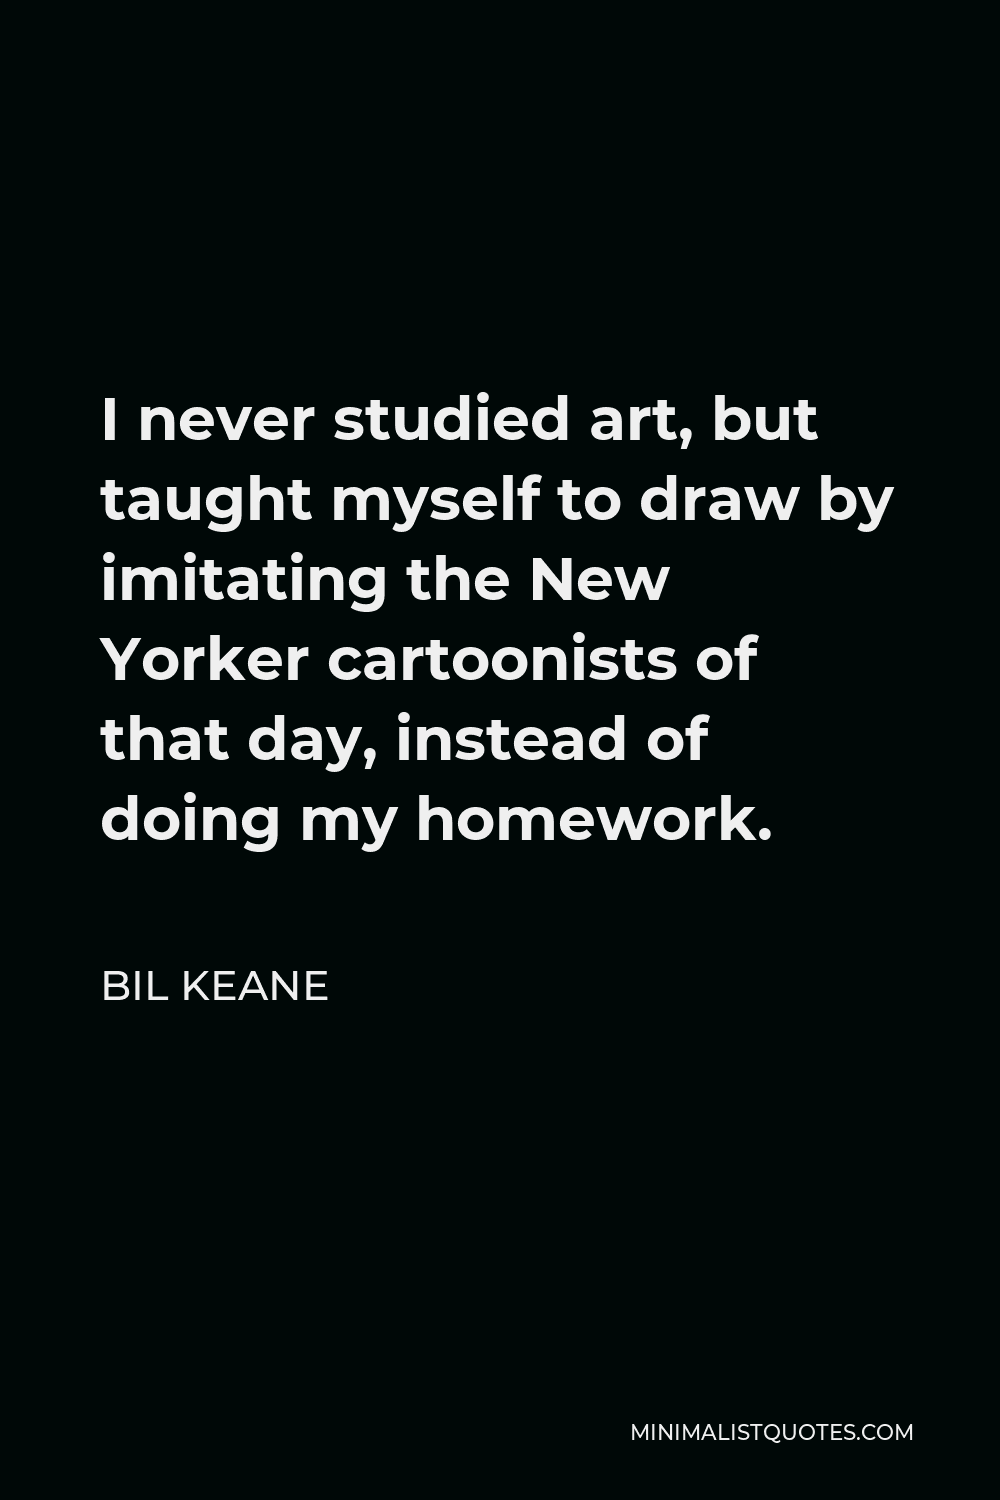 Bil Keane Quote - I never studied art, but taught myself to draw by imitating the New Yorker cartoonists of that day, instead of doing my homework.